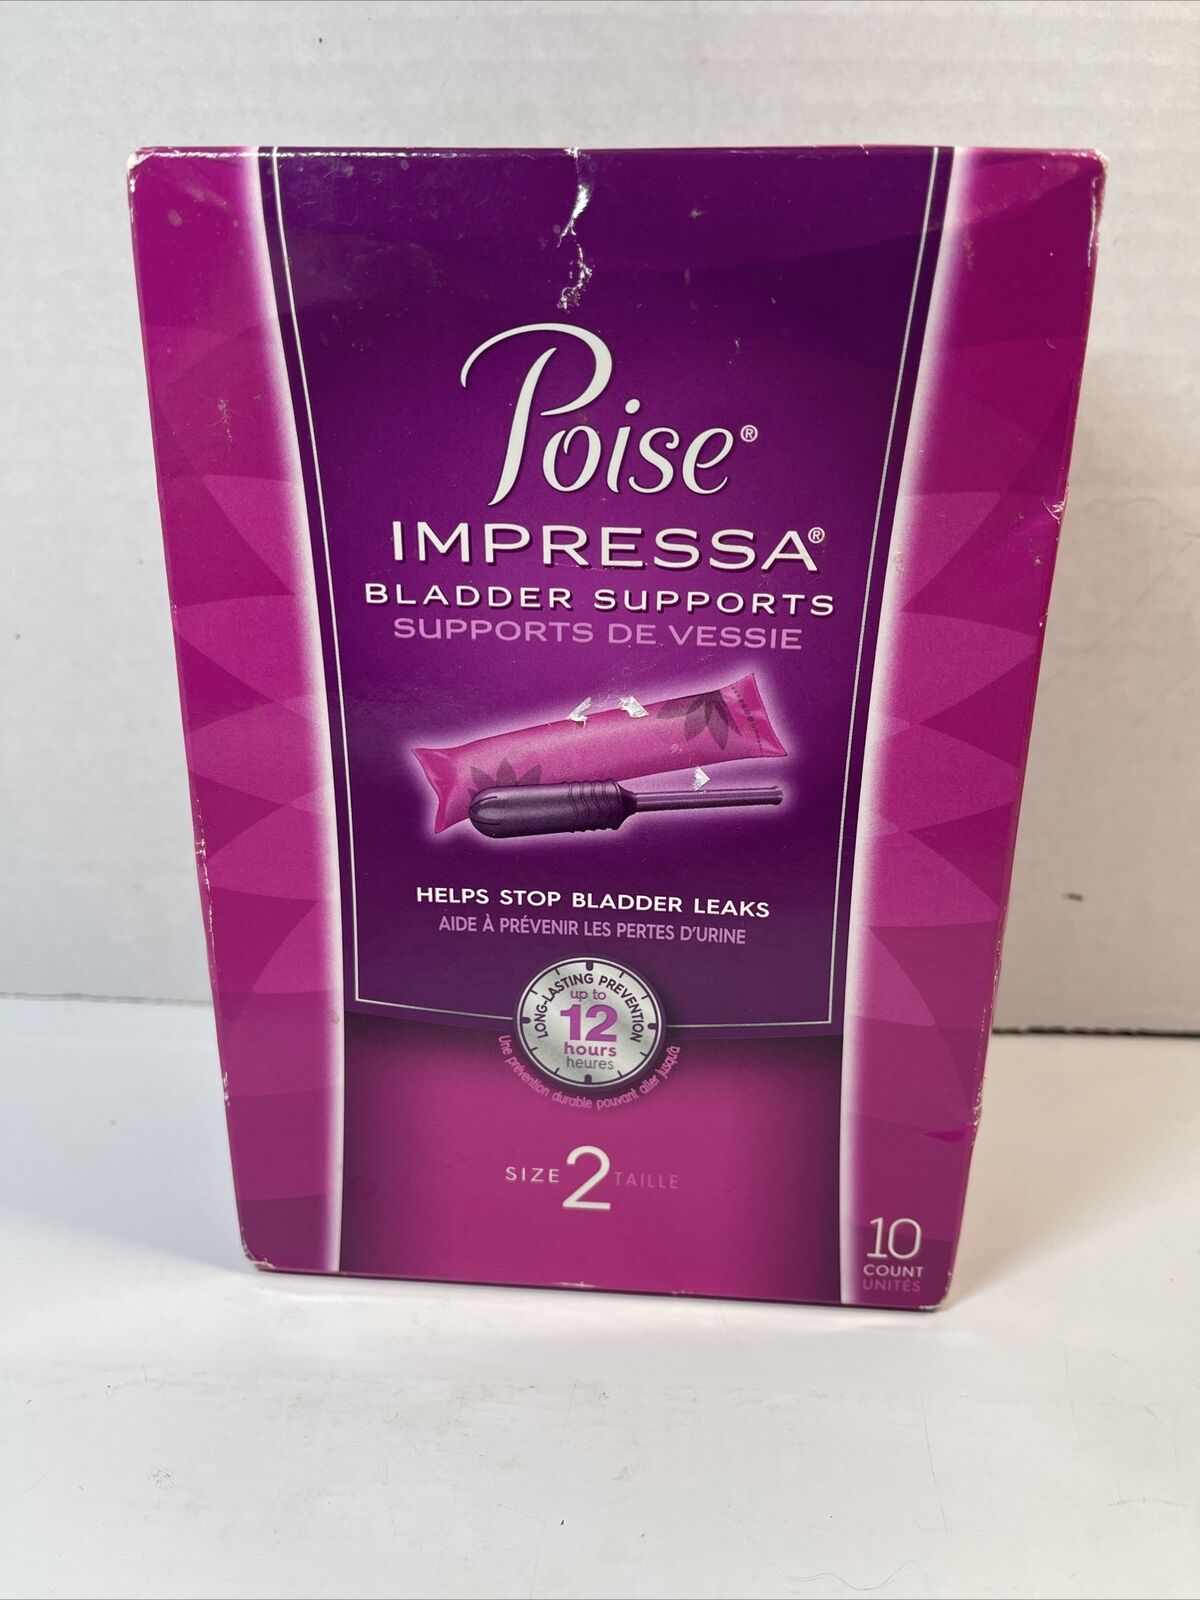 Poise IMPRESSA • Size 2 • Bladder Supports - 10 COUNT - EXP : 2018